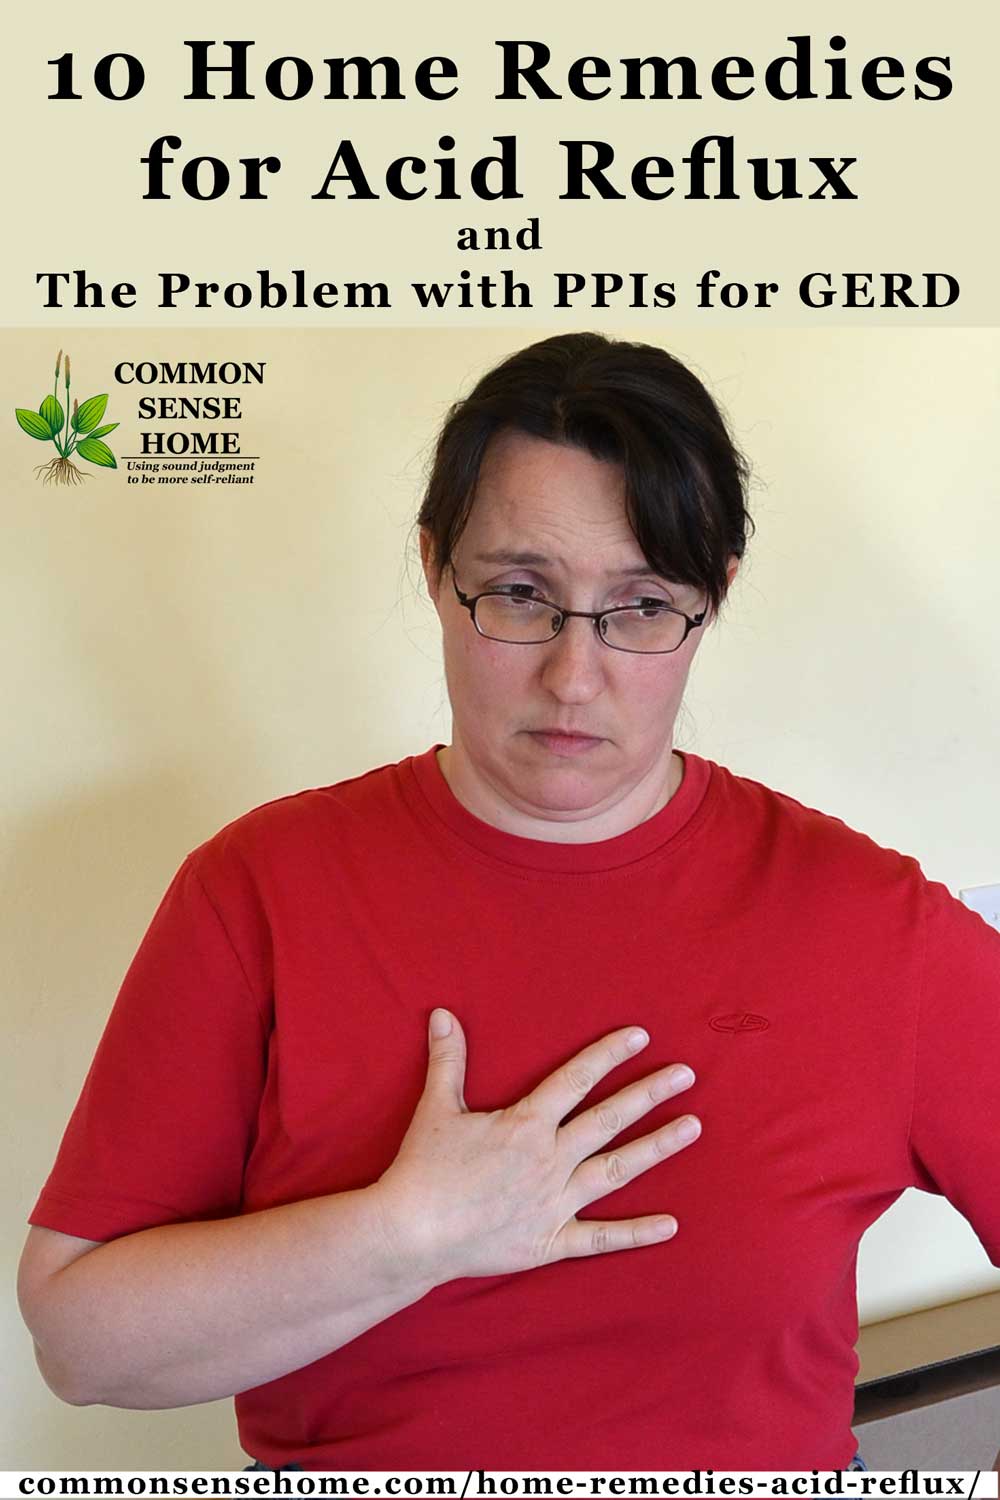 10 home remedies for acid reflux and the problem with ppis for gerd